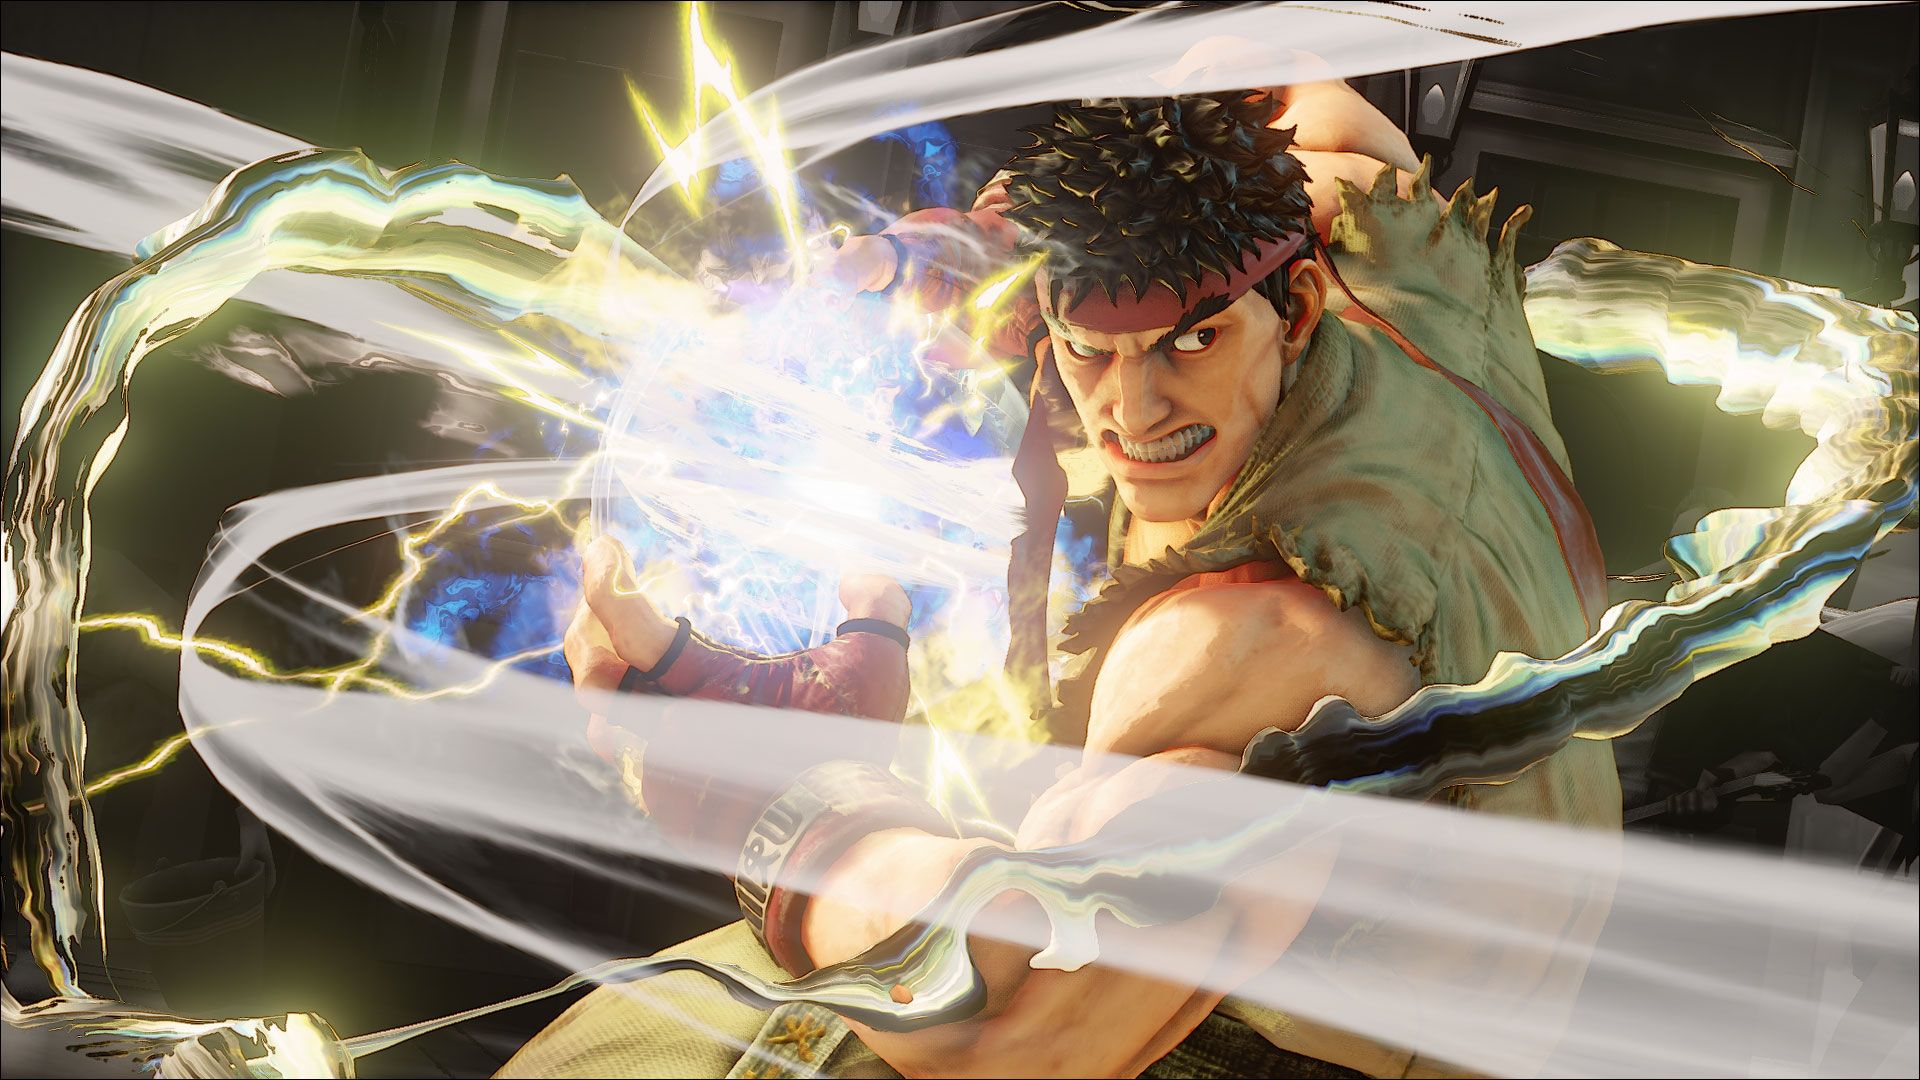 You Can Now Hadoken For Free With Street Fighter 5 Limited Trial